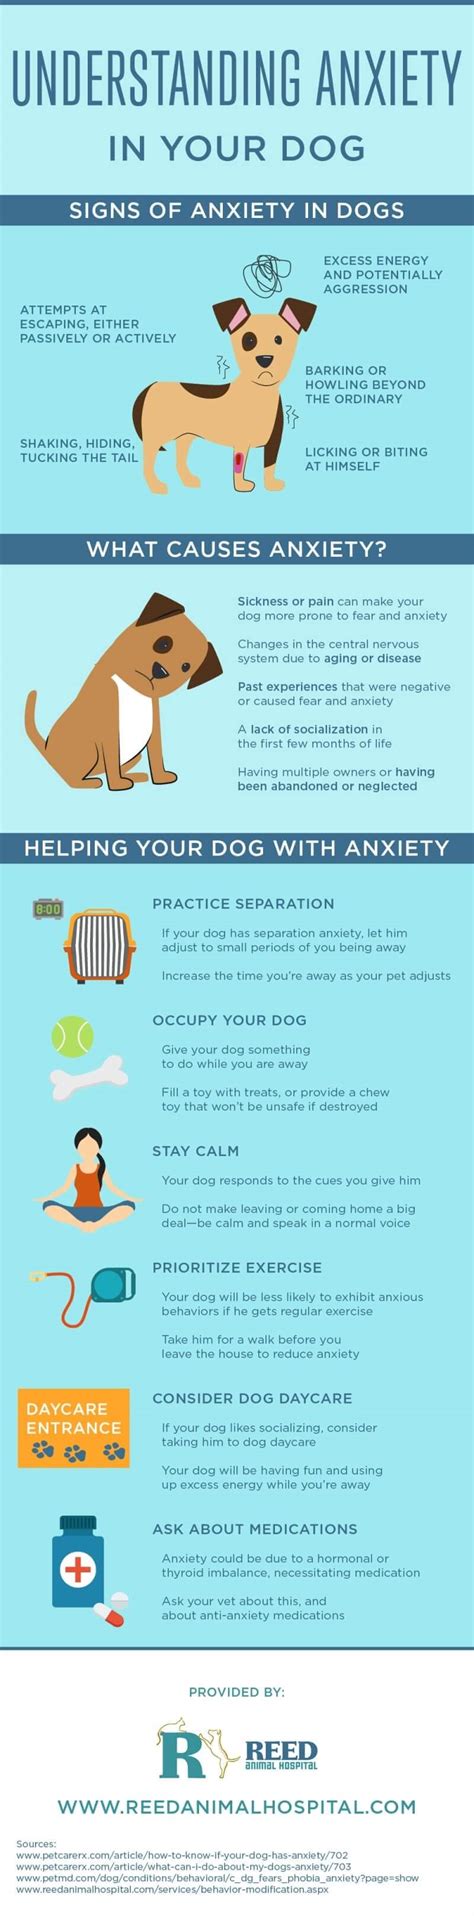 Can getting a dog trigger anxiety?